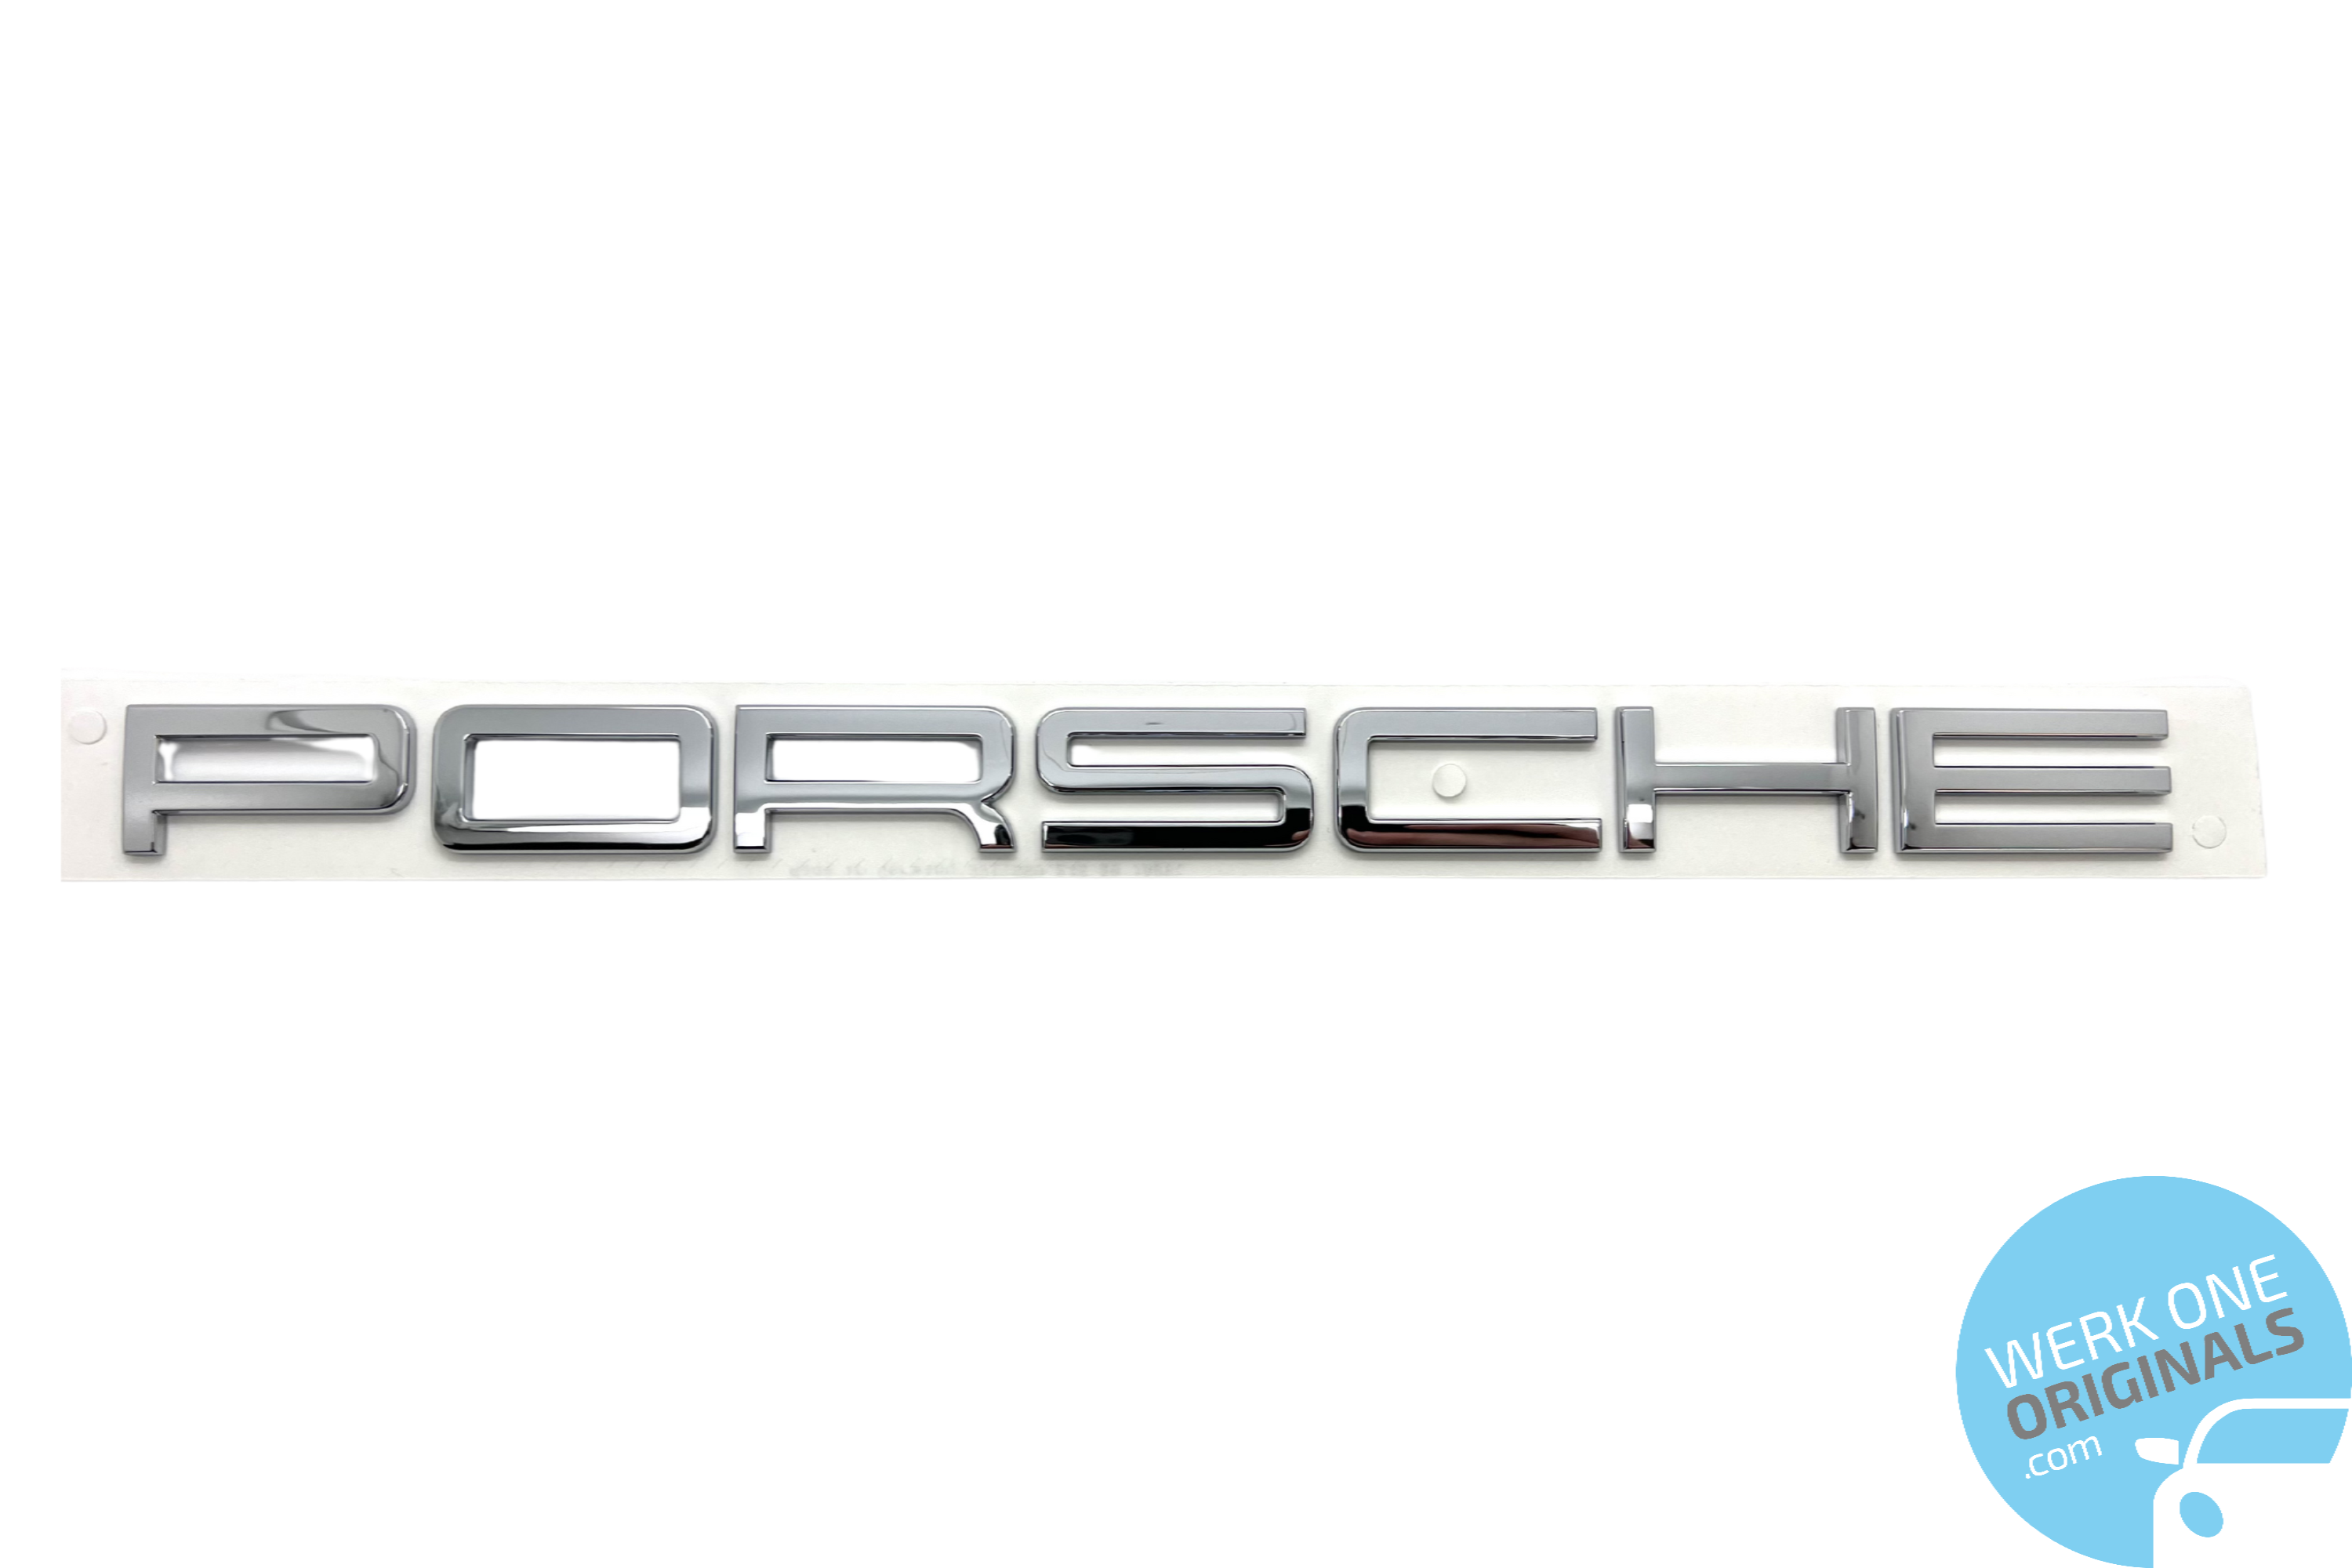 Porsche Official 'Porsche Panamera S' Rear Badge Decal in Chrome Silver for Panamera S Type 907 & 970 Models